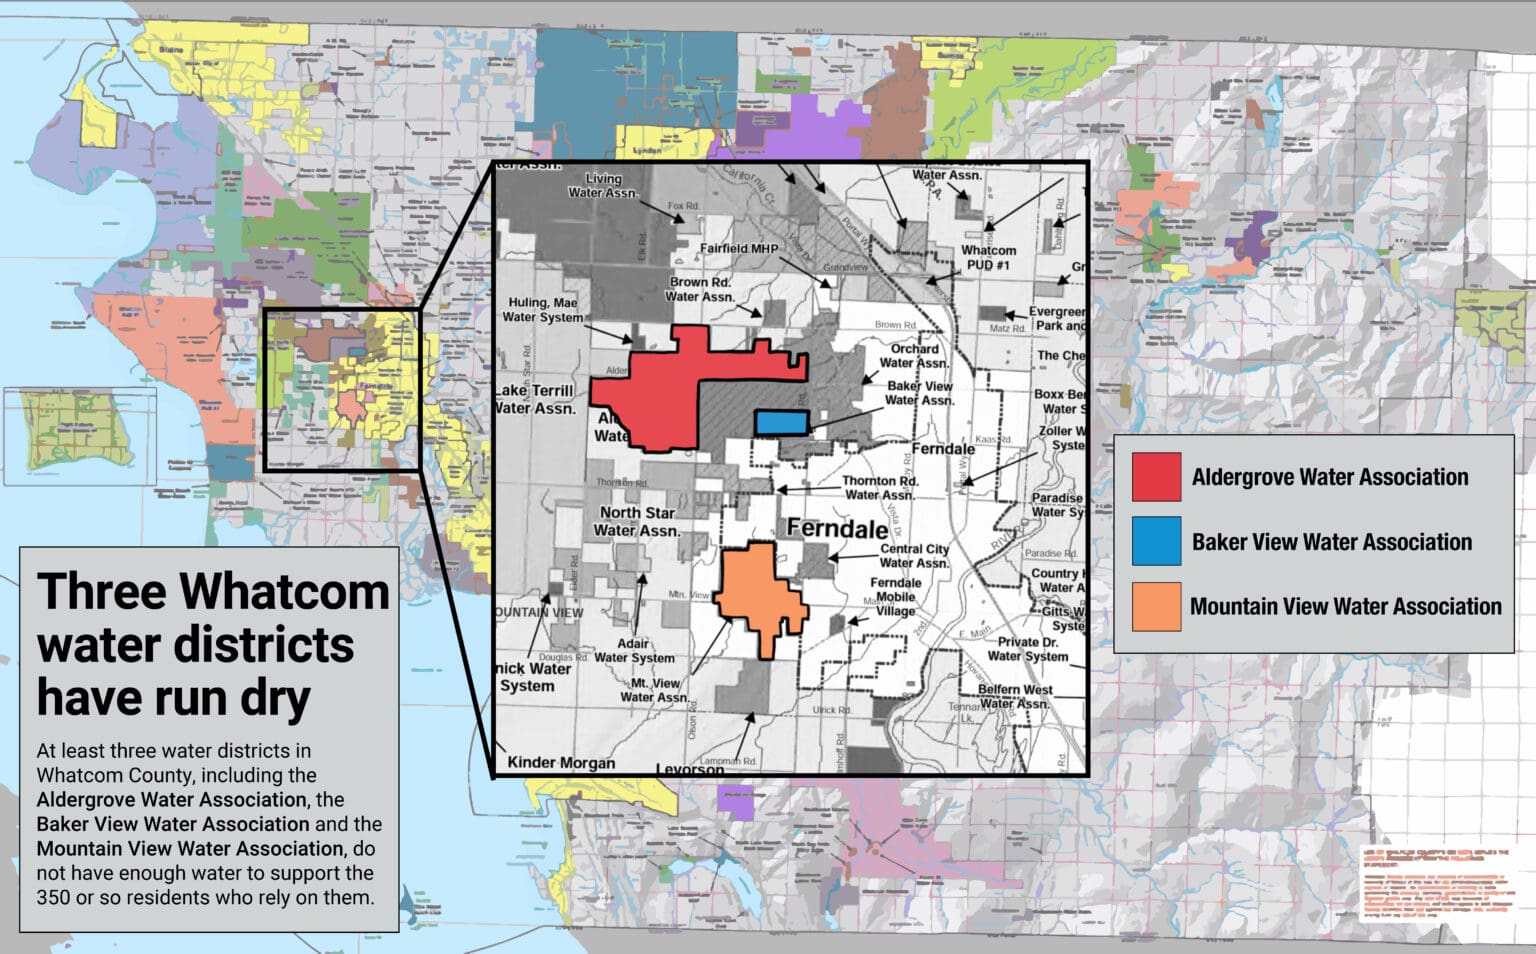 At least three water districts in Whatcom County